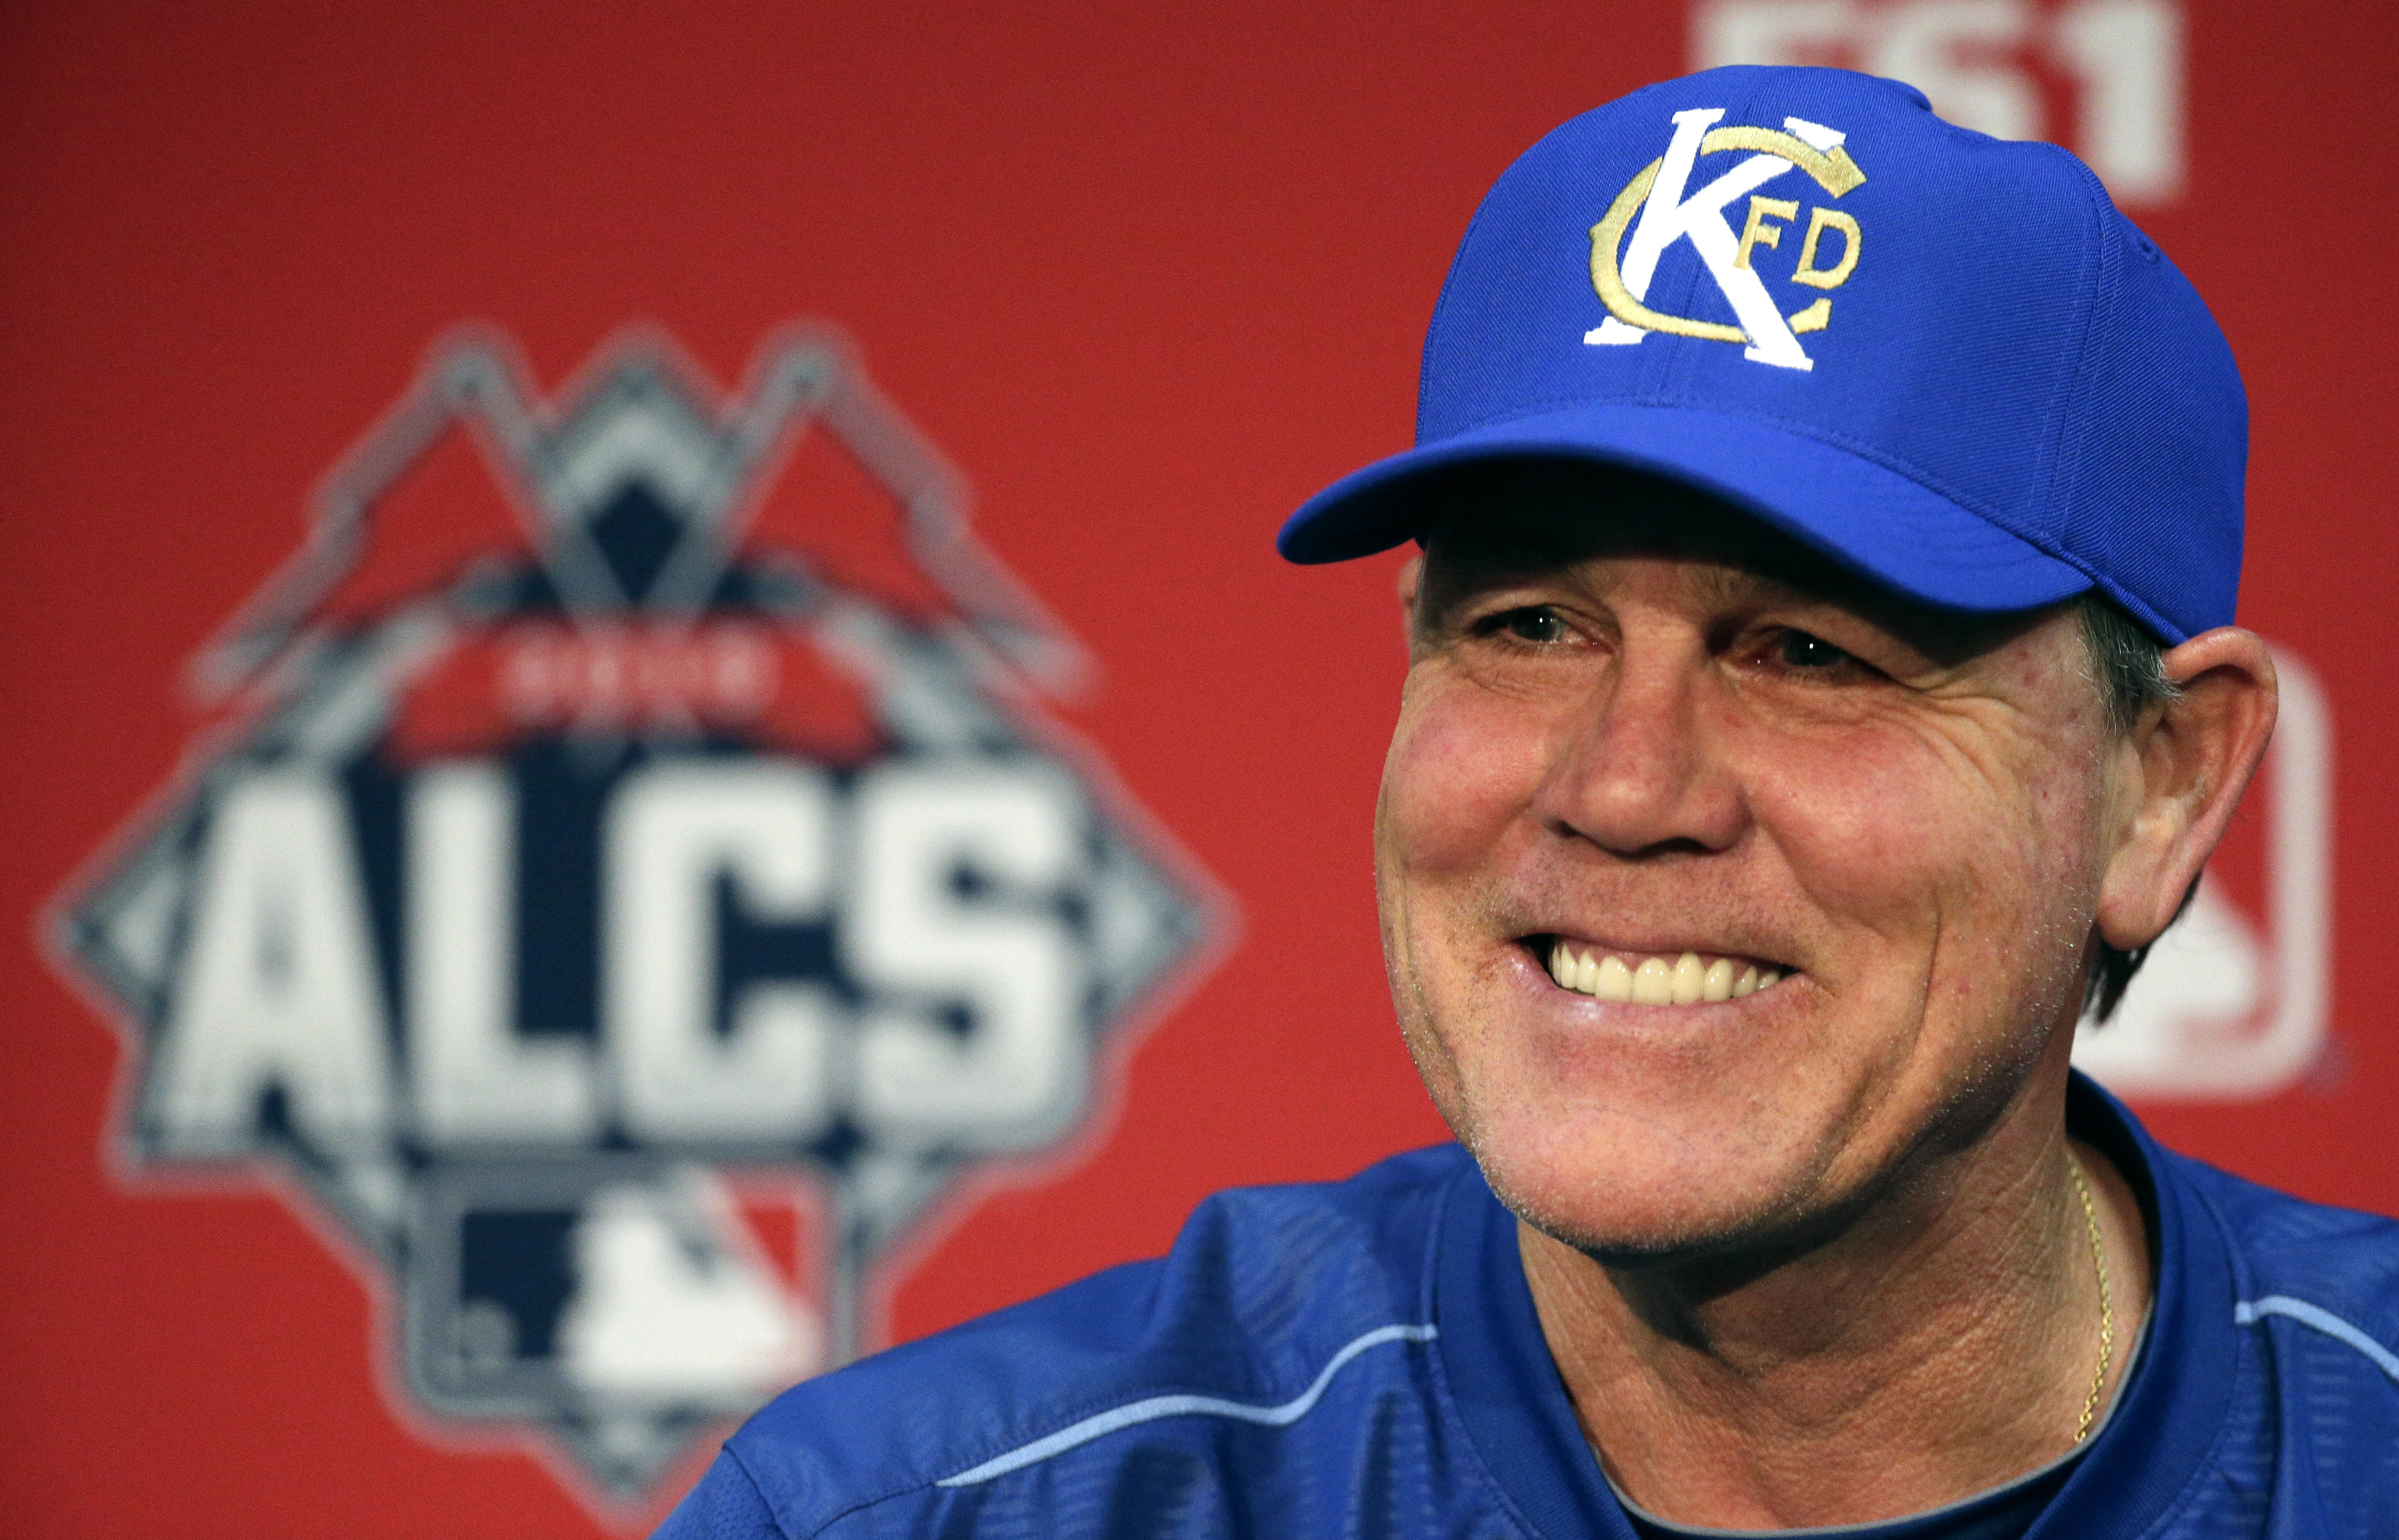 Kansas City Royals manager Ned Yost to retire after season